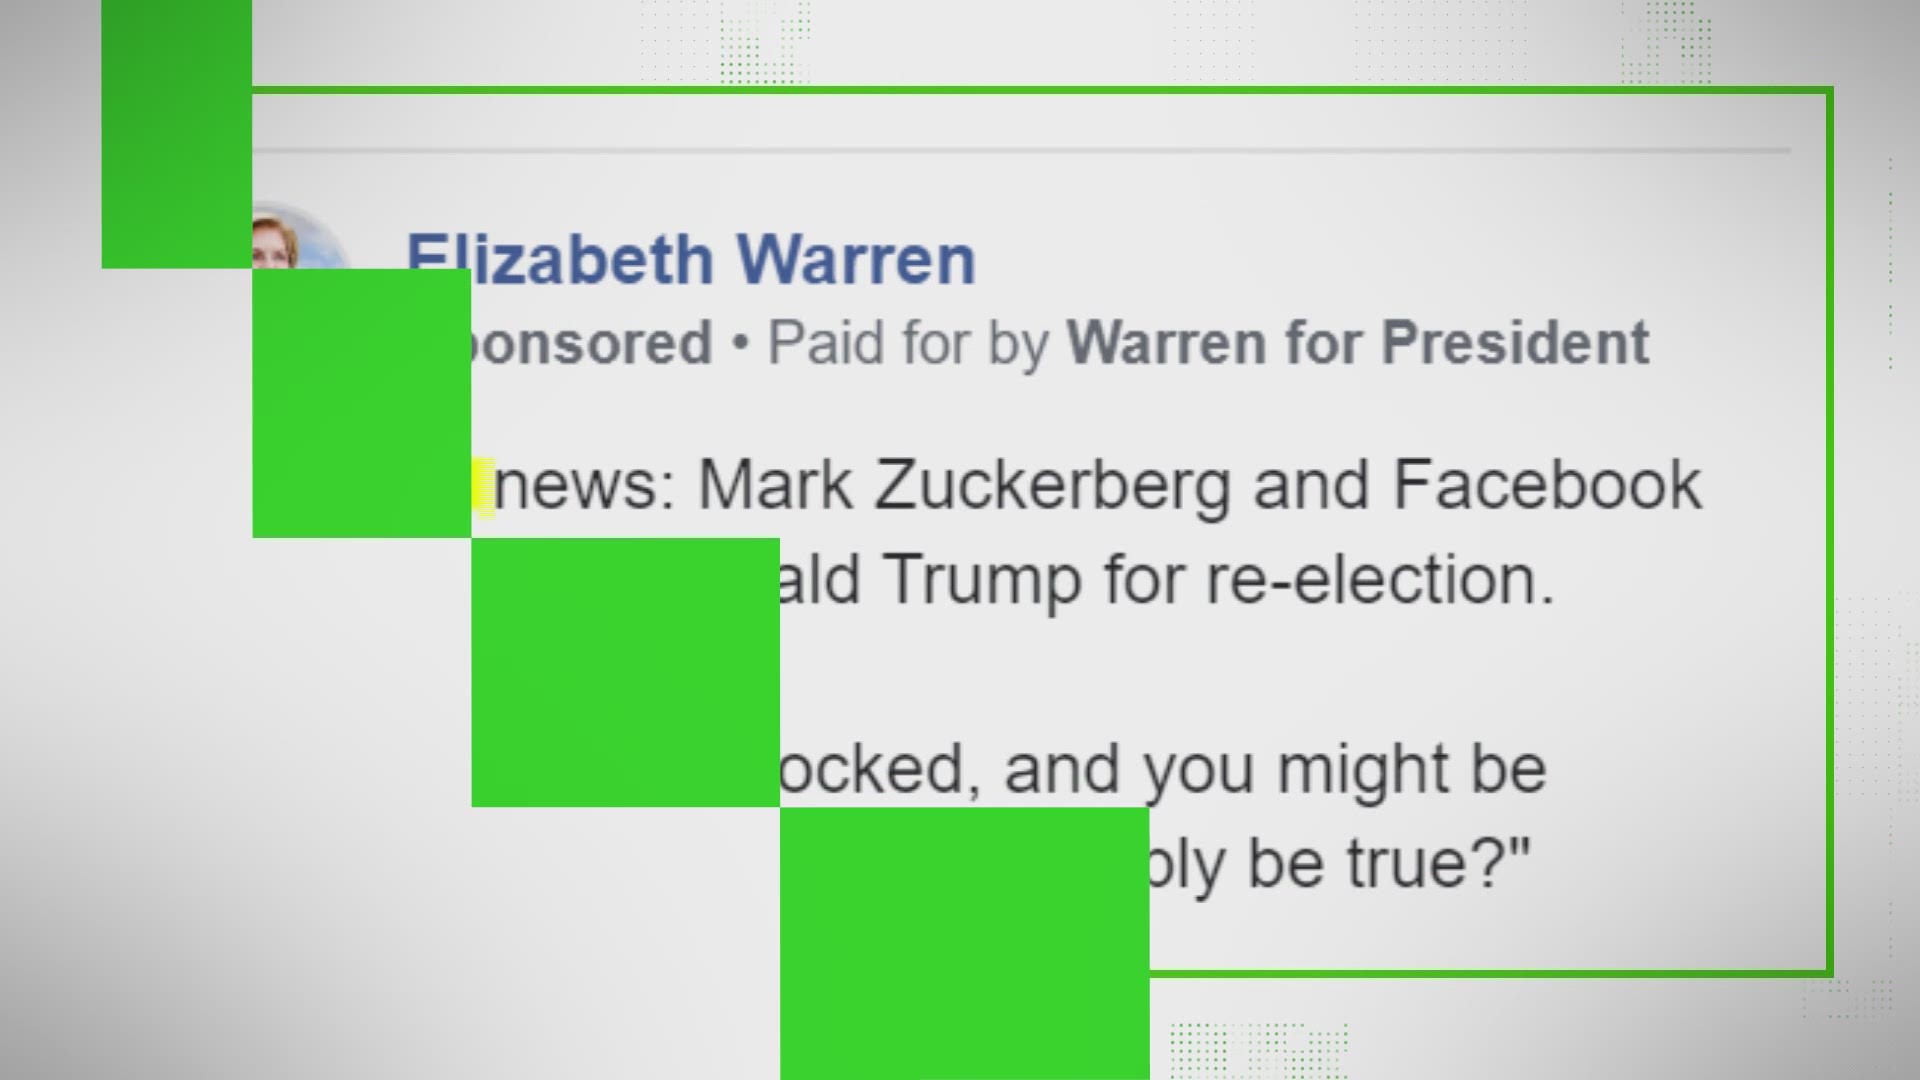 It's an ad with a simple headline, claiming Facebook endorsed Donald Trump for re-election. But that's a false claim - and done on purpose to prove a point.